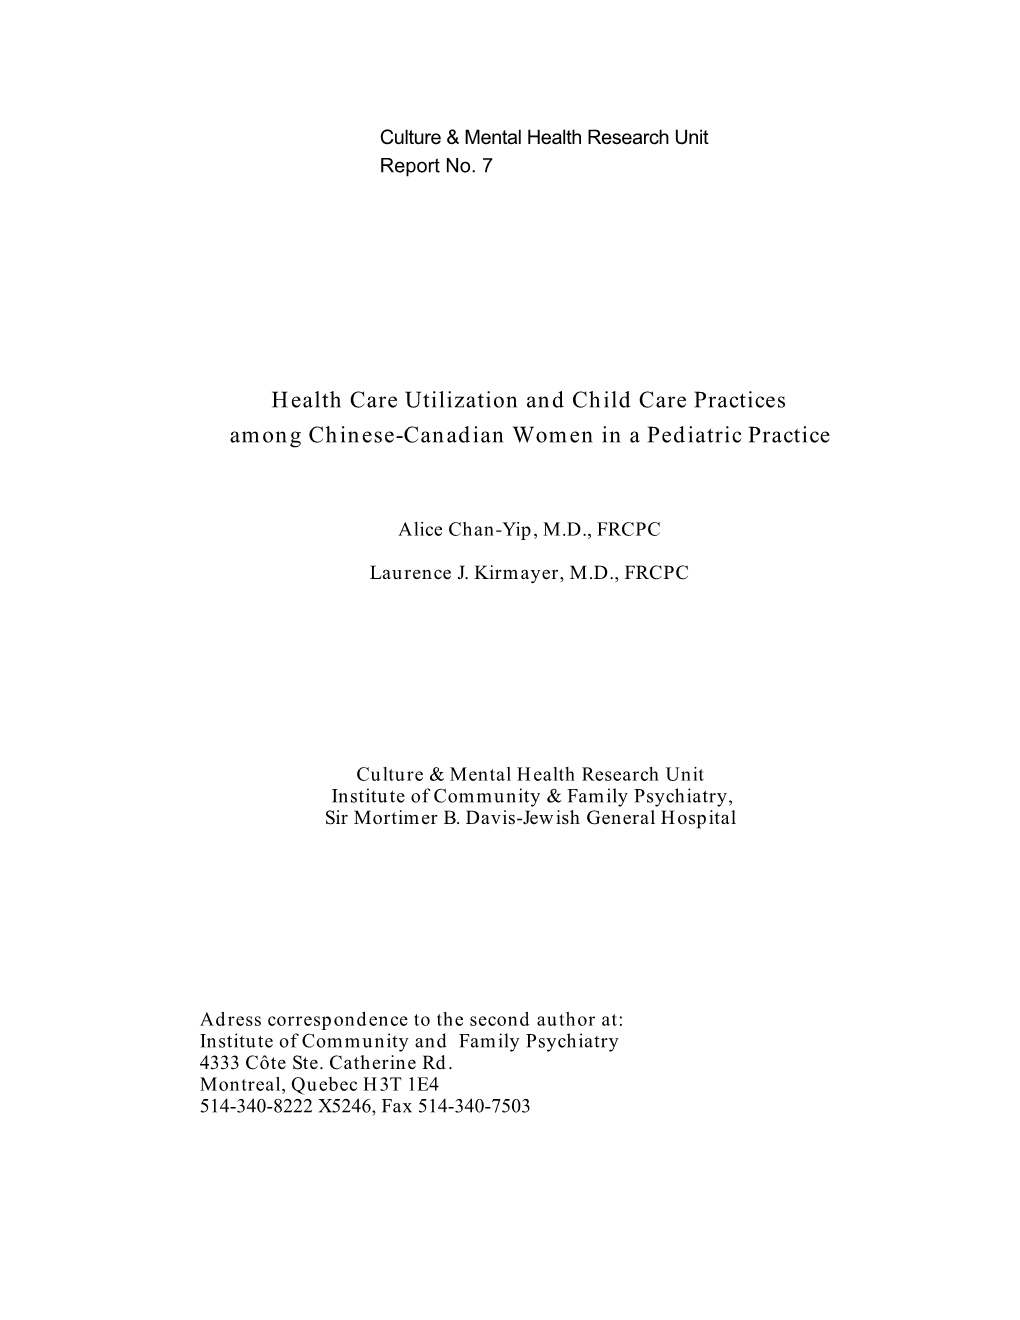 Health Care Utilization and Child Care Practices Among Chinese-Canadian Women in a Pediatric Practice